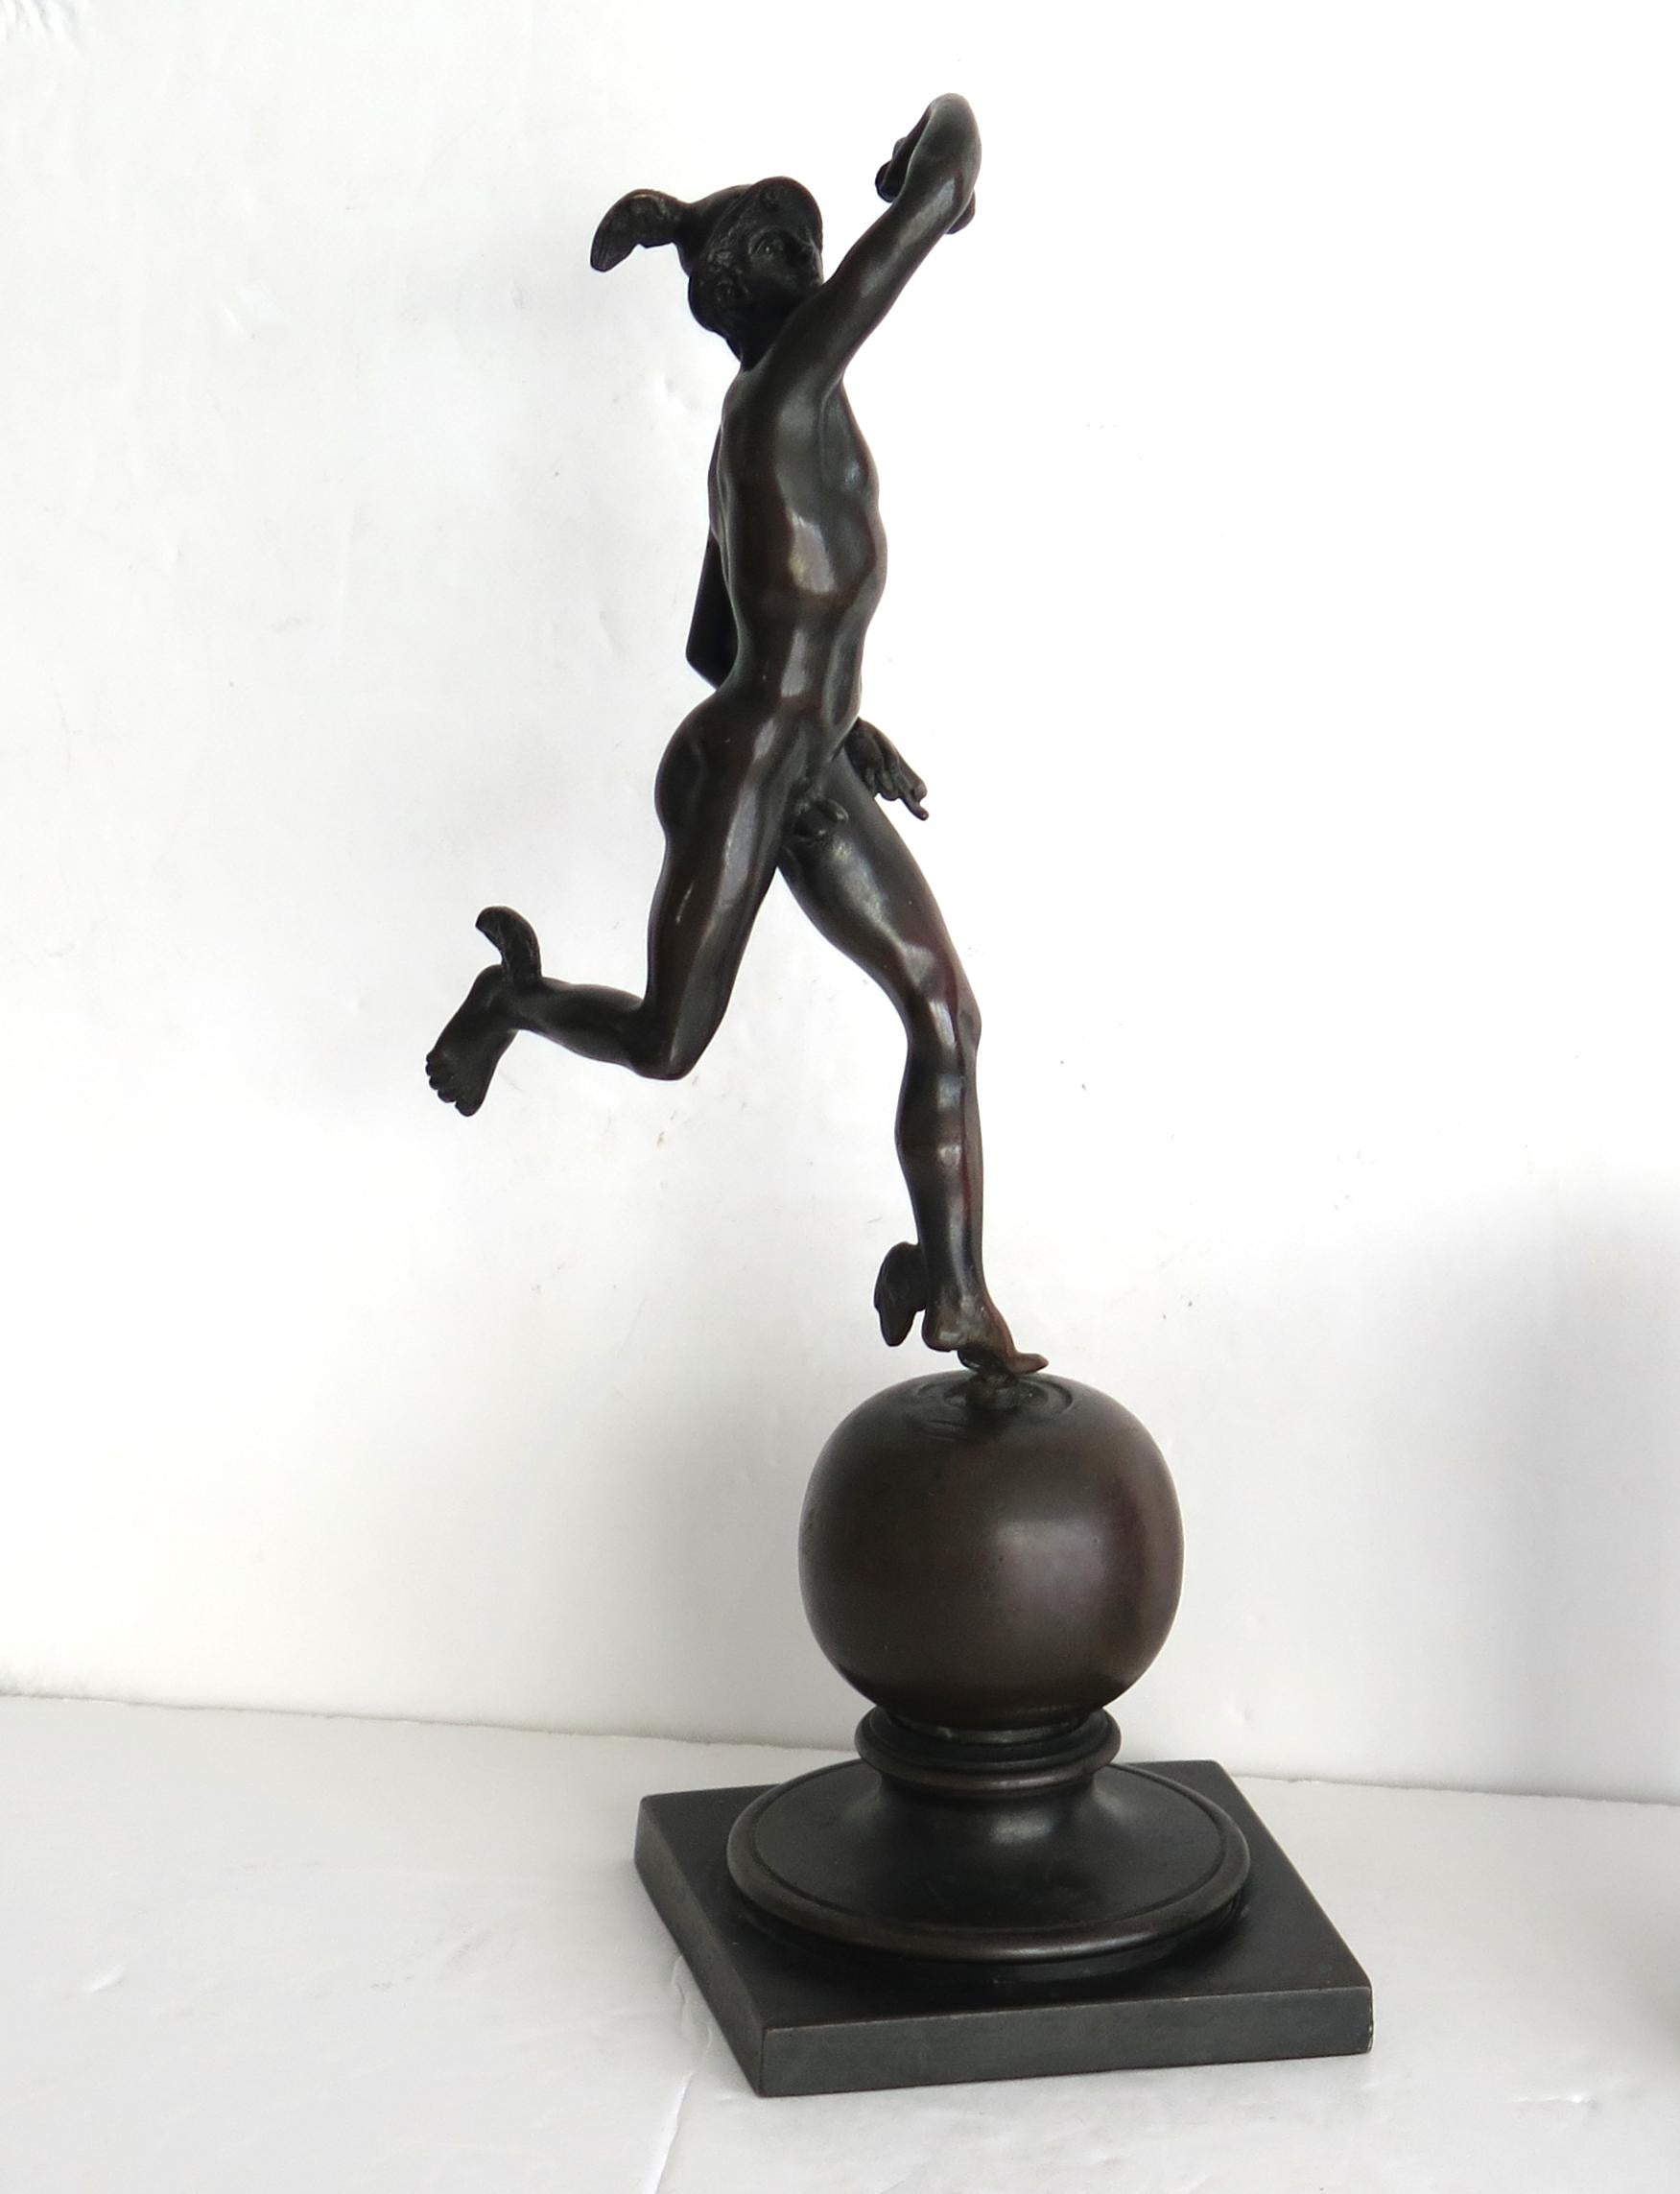 This is a solid bronze figurine sculpture of Hermes or Mercury from Greek and Roman mythology respectively, and we date the figure to the 19th century, probably by a French or Austrian maker.

The bronze figure is well sculpted in good clear